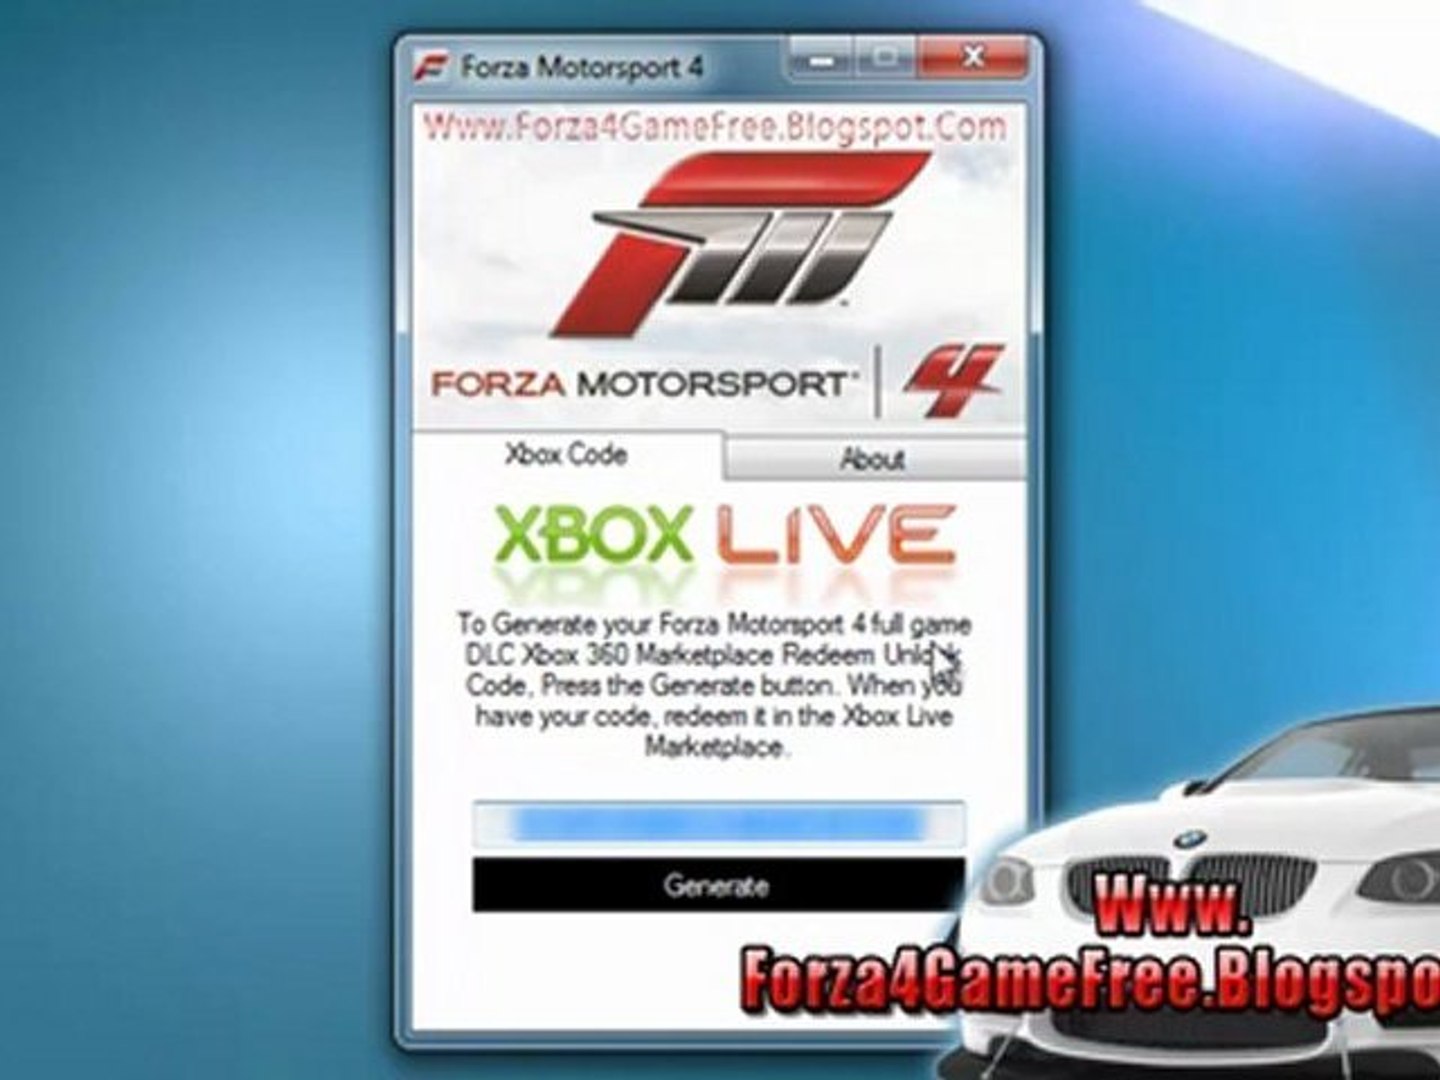 How to Install Forza Motorsport 4 Free On Xbox 360 - Tutorial - video  Dailymotion